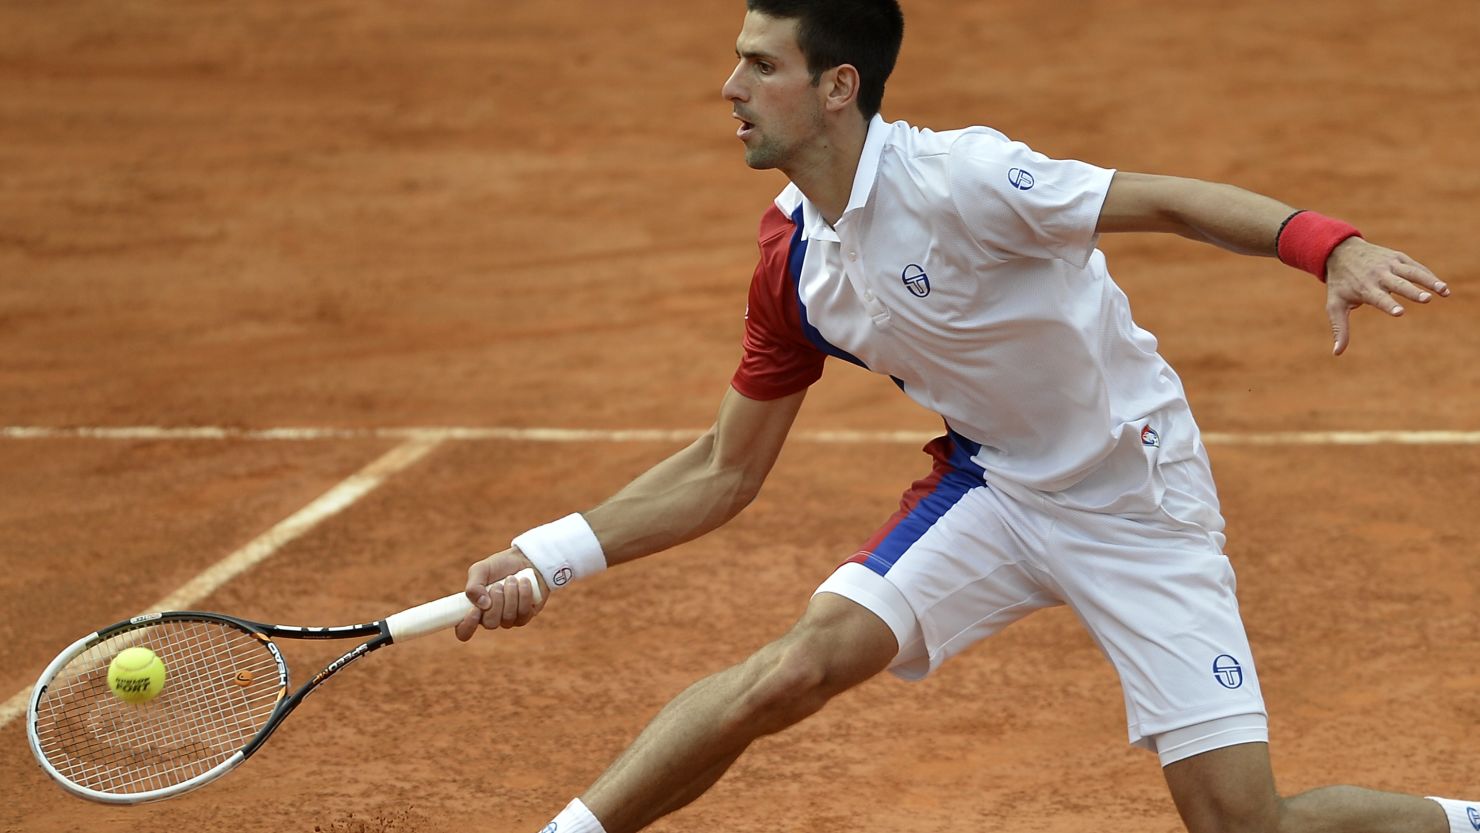 Novak Djokovic plays a return during his straight sets win over Jo-Wilfried Tsonga in the Rome quarterfinals.